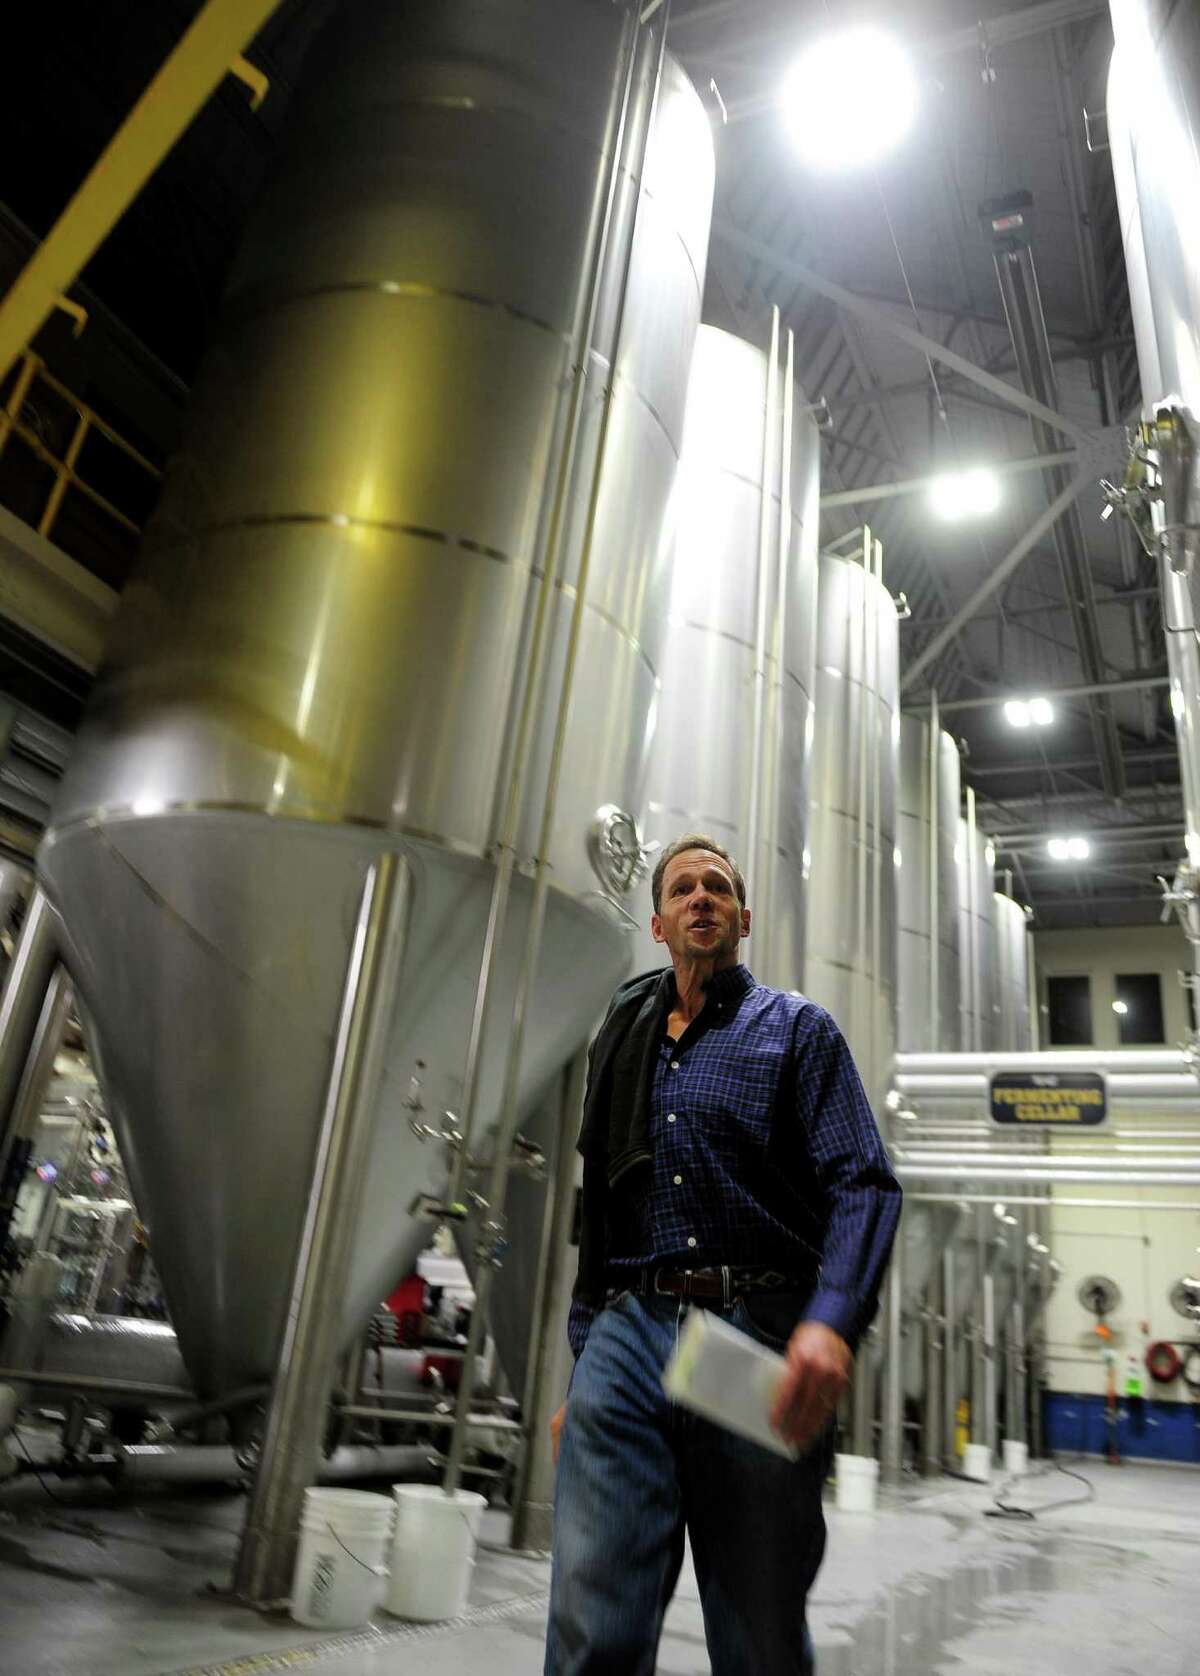 Two Roads Brewery CFO Peter Doering shows the brewery's new energy efficient LED lights have recently been installed on Stratford Avenue in Stratford, Conn. on Wednesday Nov. 2, 2016. The new lights, installed by Digital Lumens, are state-of-the-art, can be controlled via WiFi or from a central computer and have motion sensors.